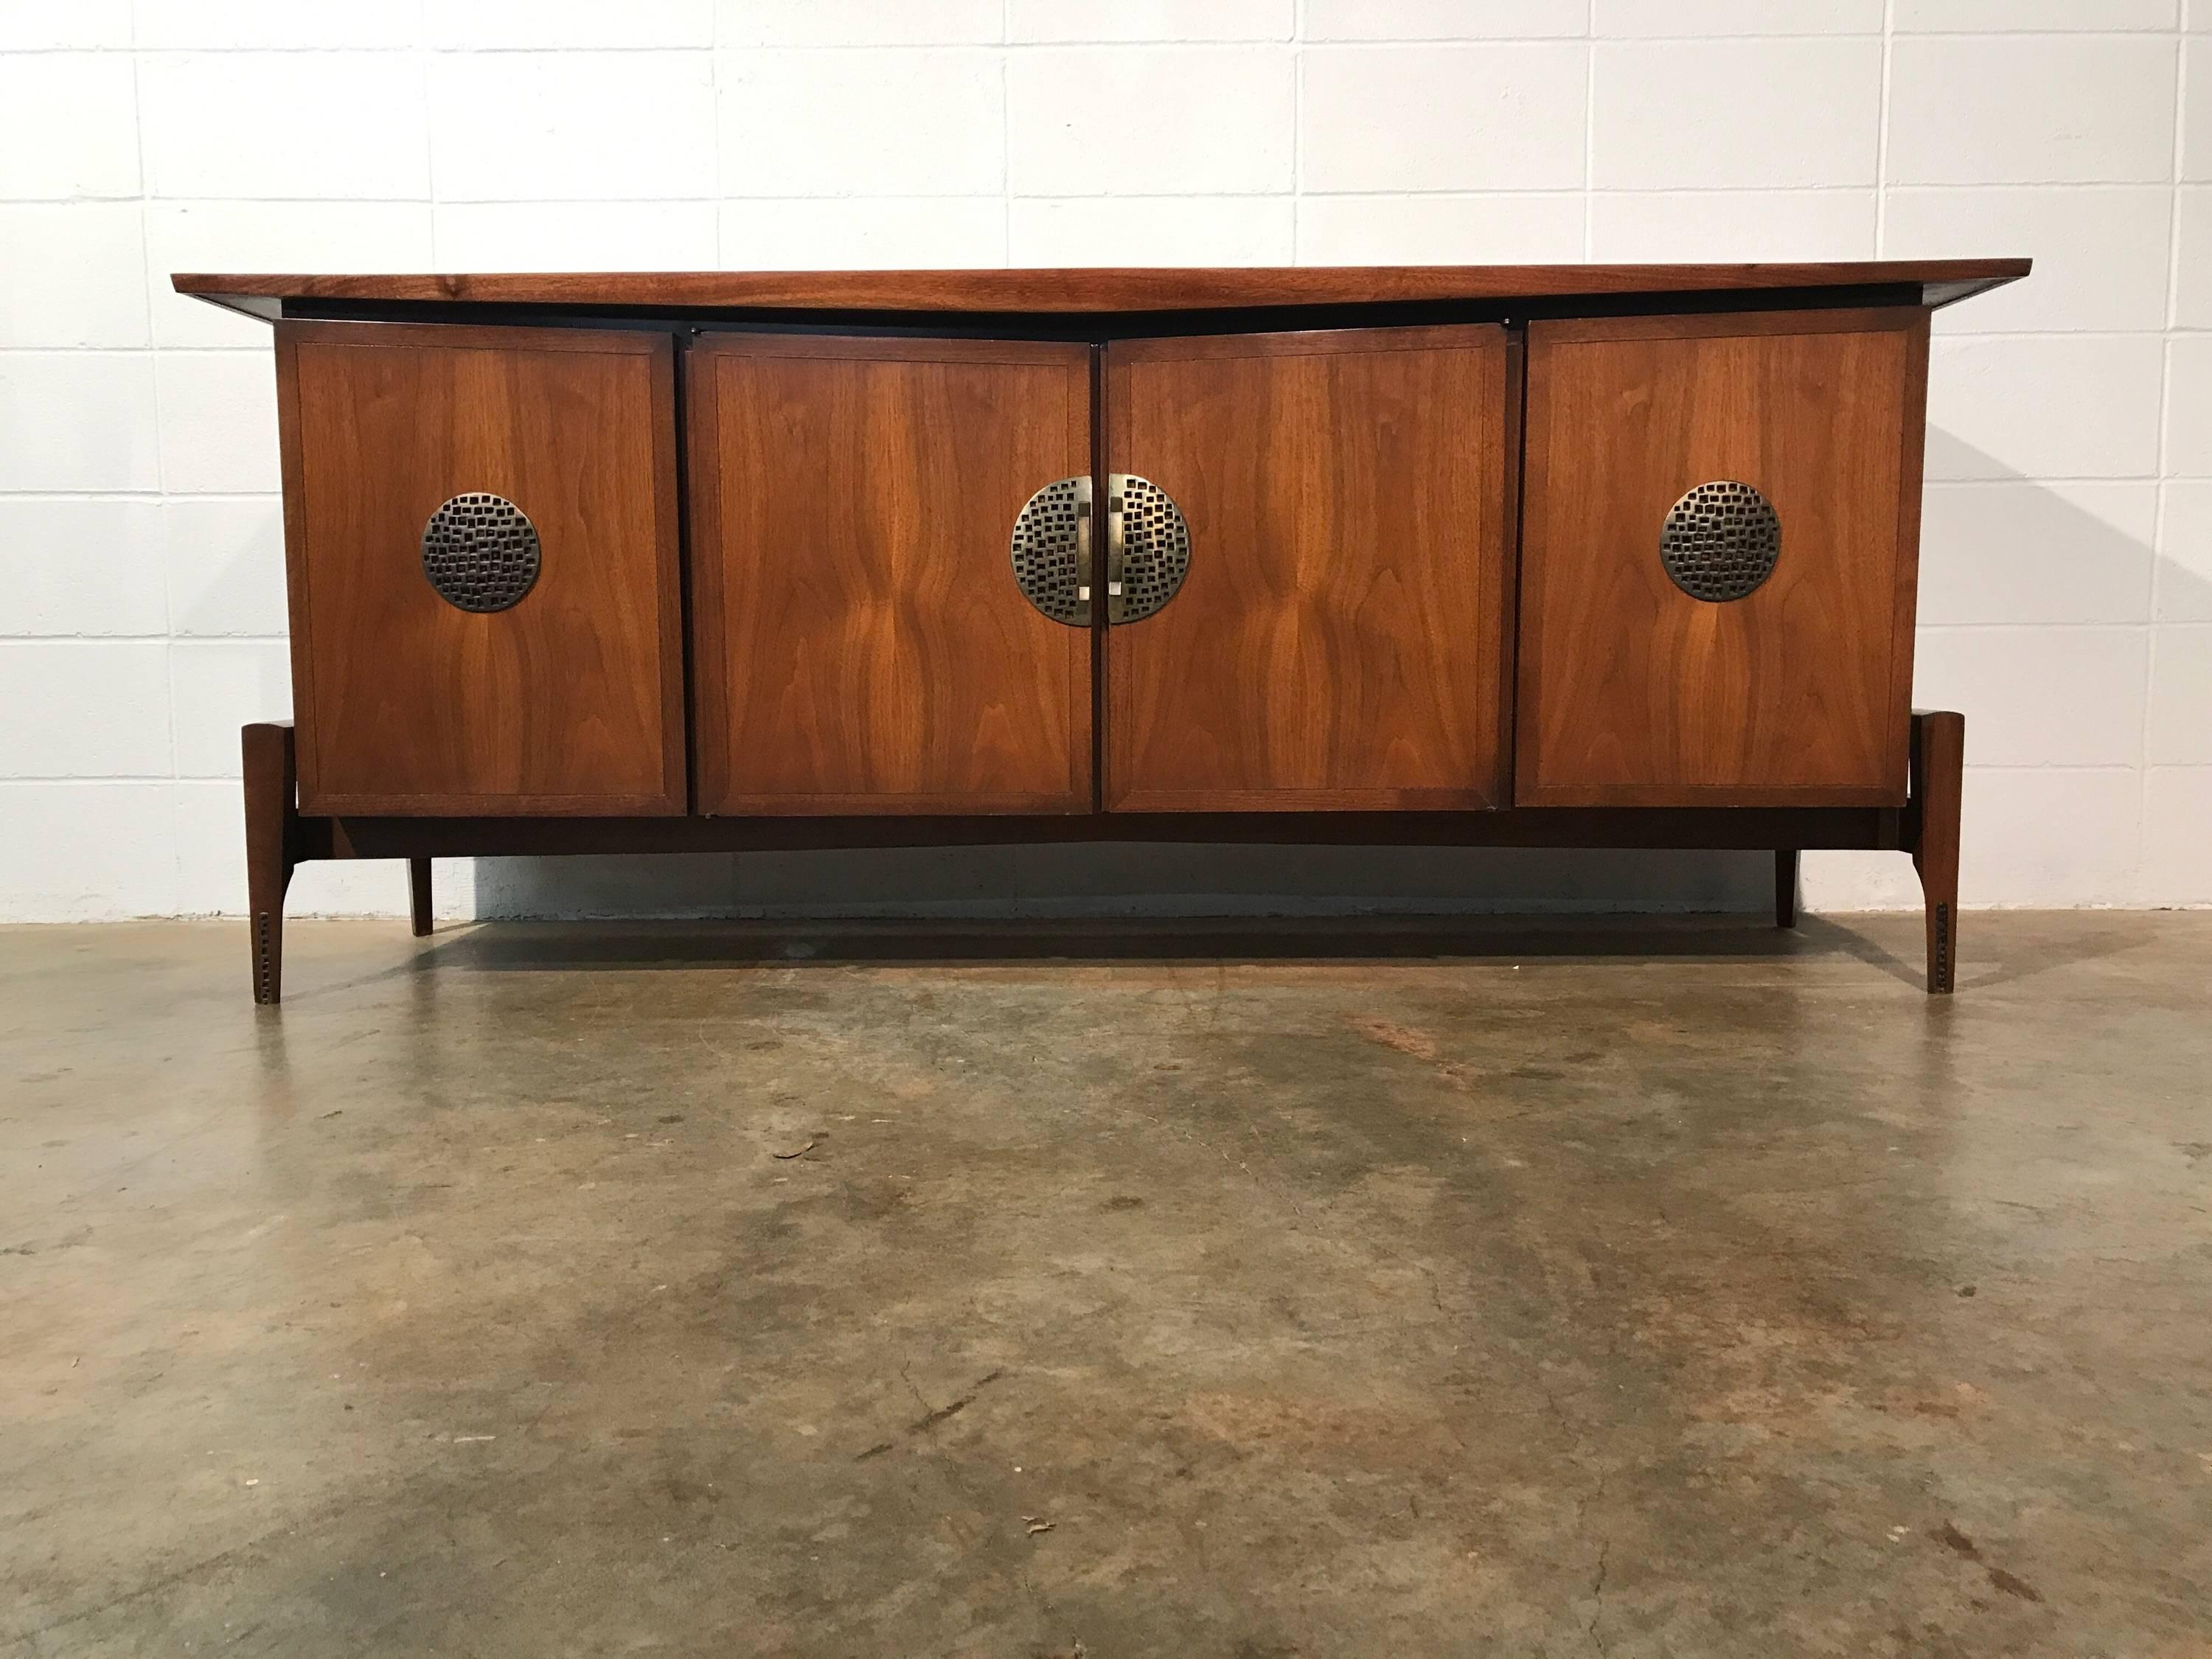 Sophisticated Mid-Century Modern Credenza Asian Flair Hobey Helen Baker 11